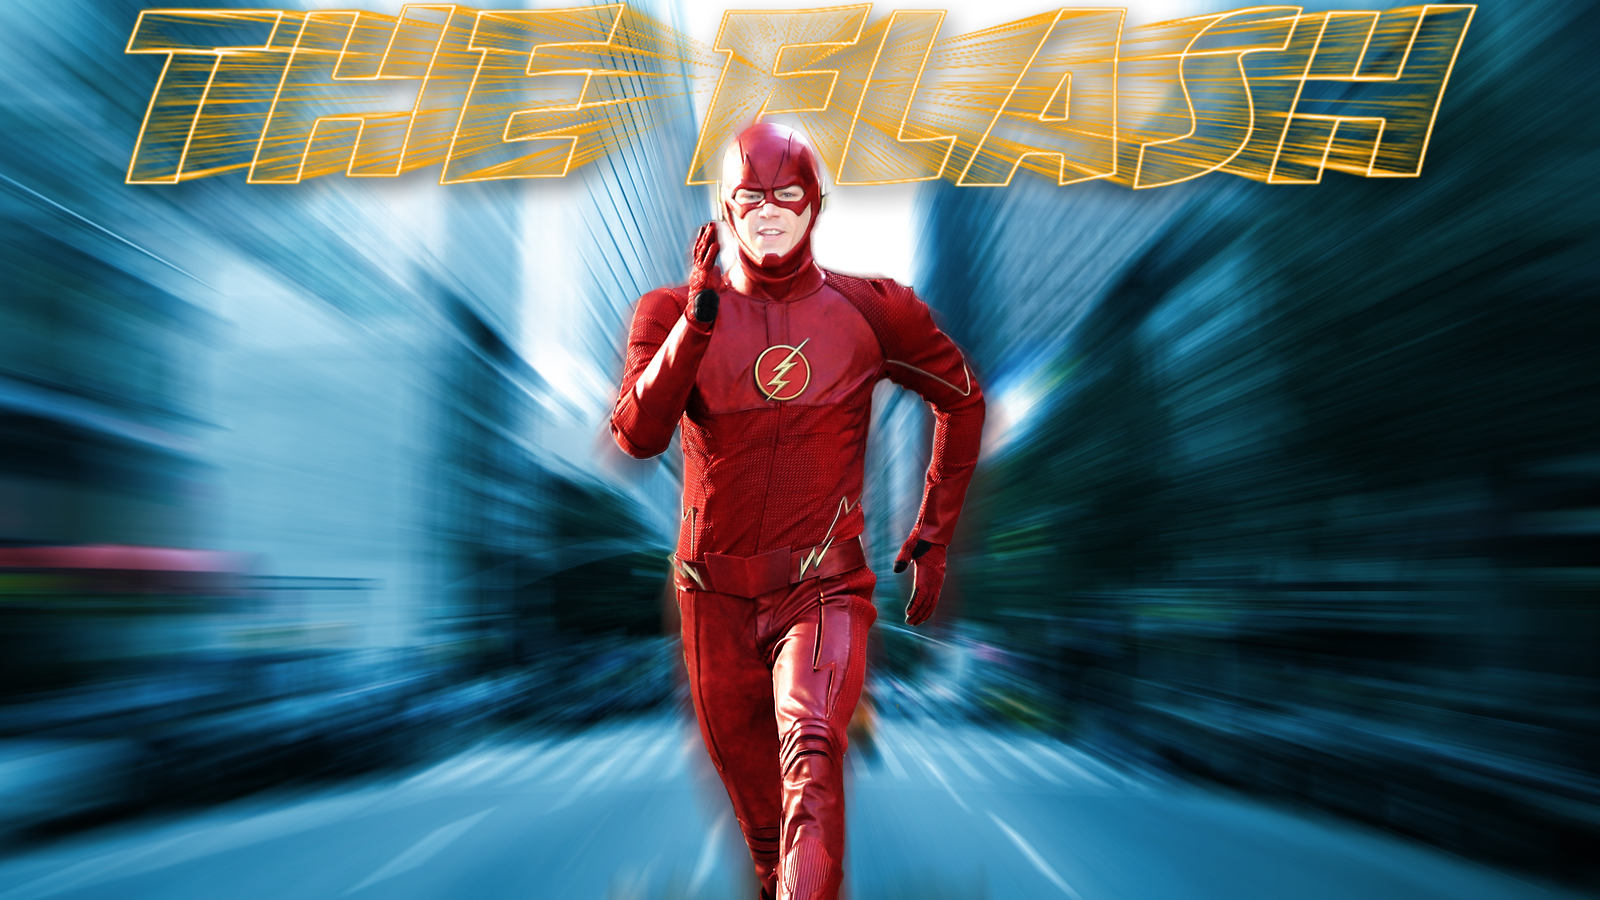 The Flash 2014 Tv Series The flash 2014 tv series the flash tv wp by